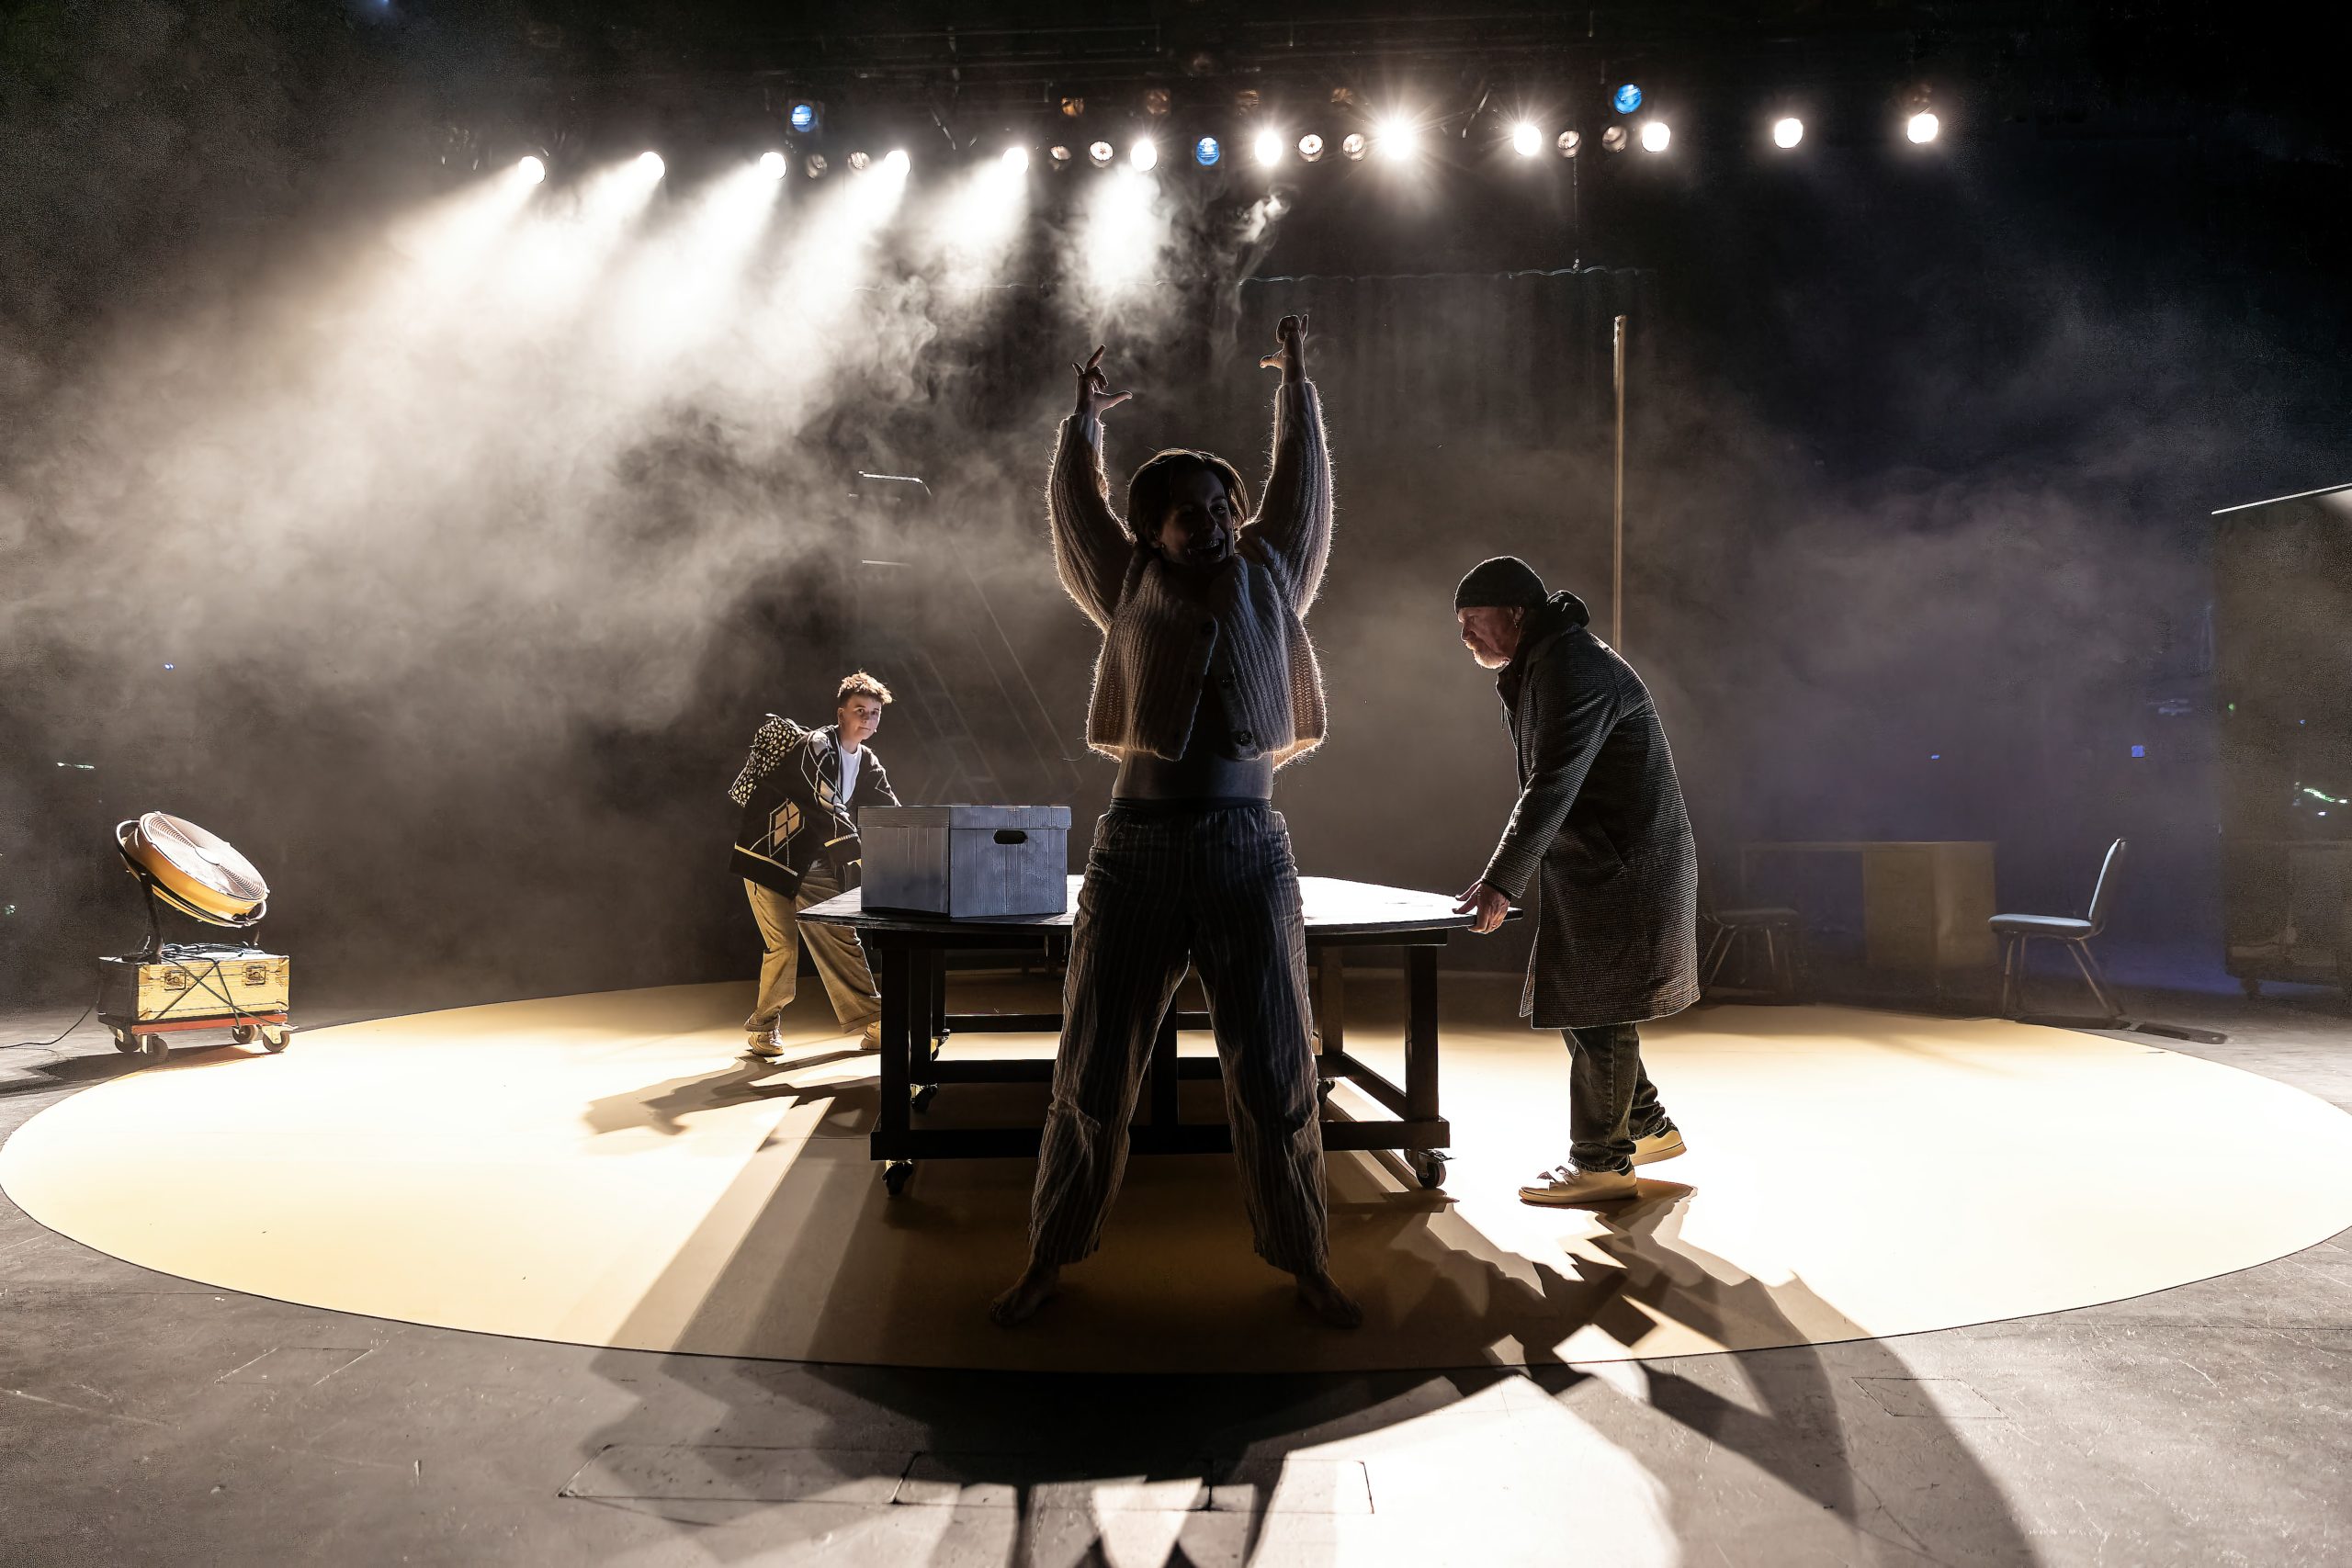 A photo of the production. A figure stands with their arms raise dramatically in the air in the foreground. White lights and smoke jet from the top of the image. In the background, two figures move a table and a box, in preparation for the next scene.